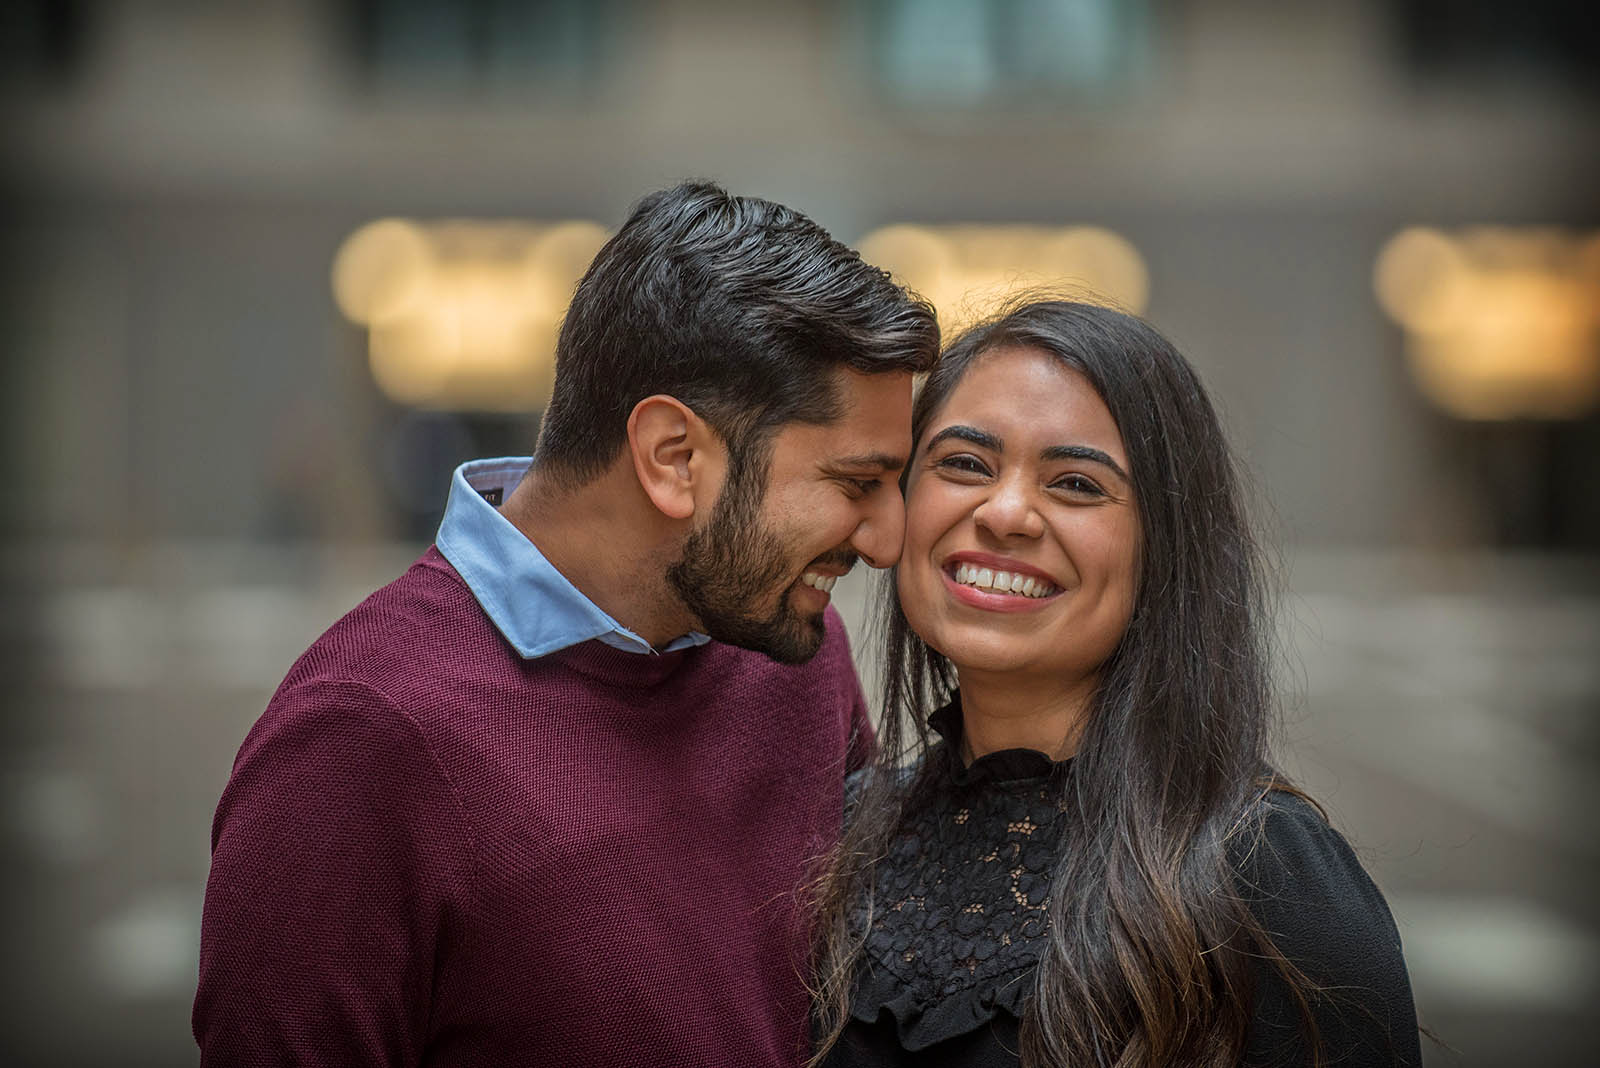 Chicago Proposal Photographer